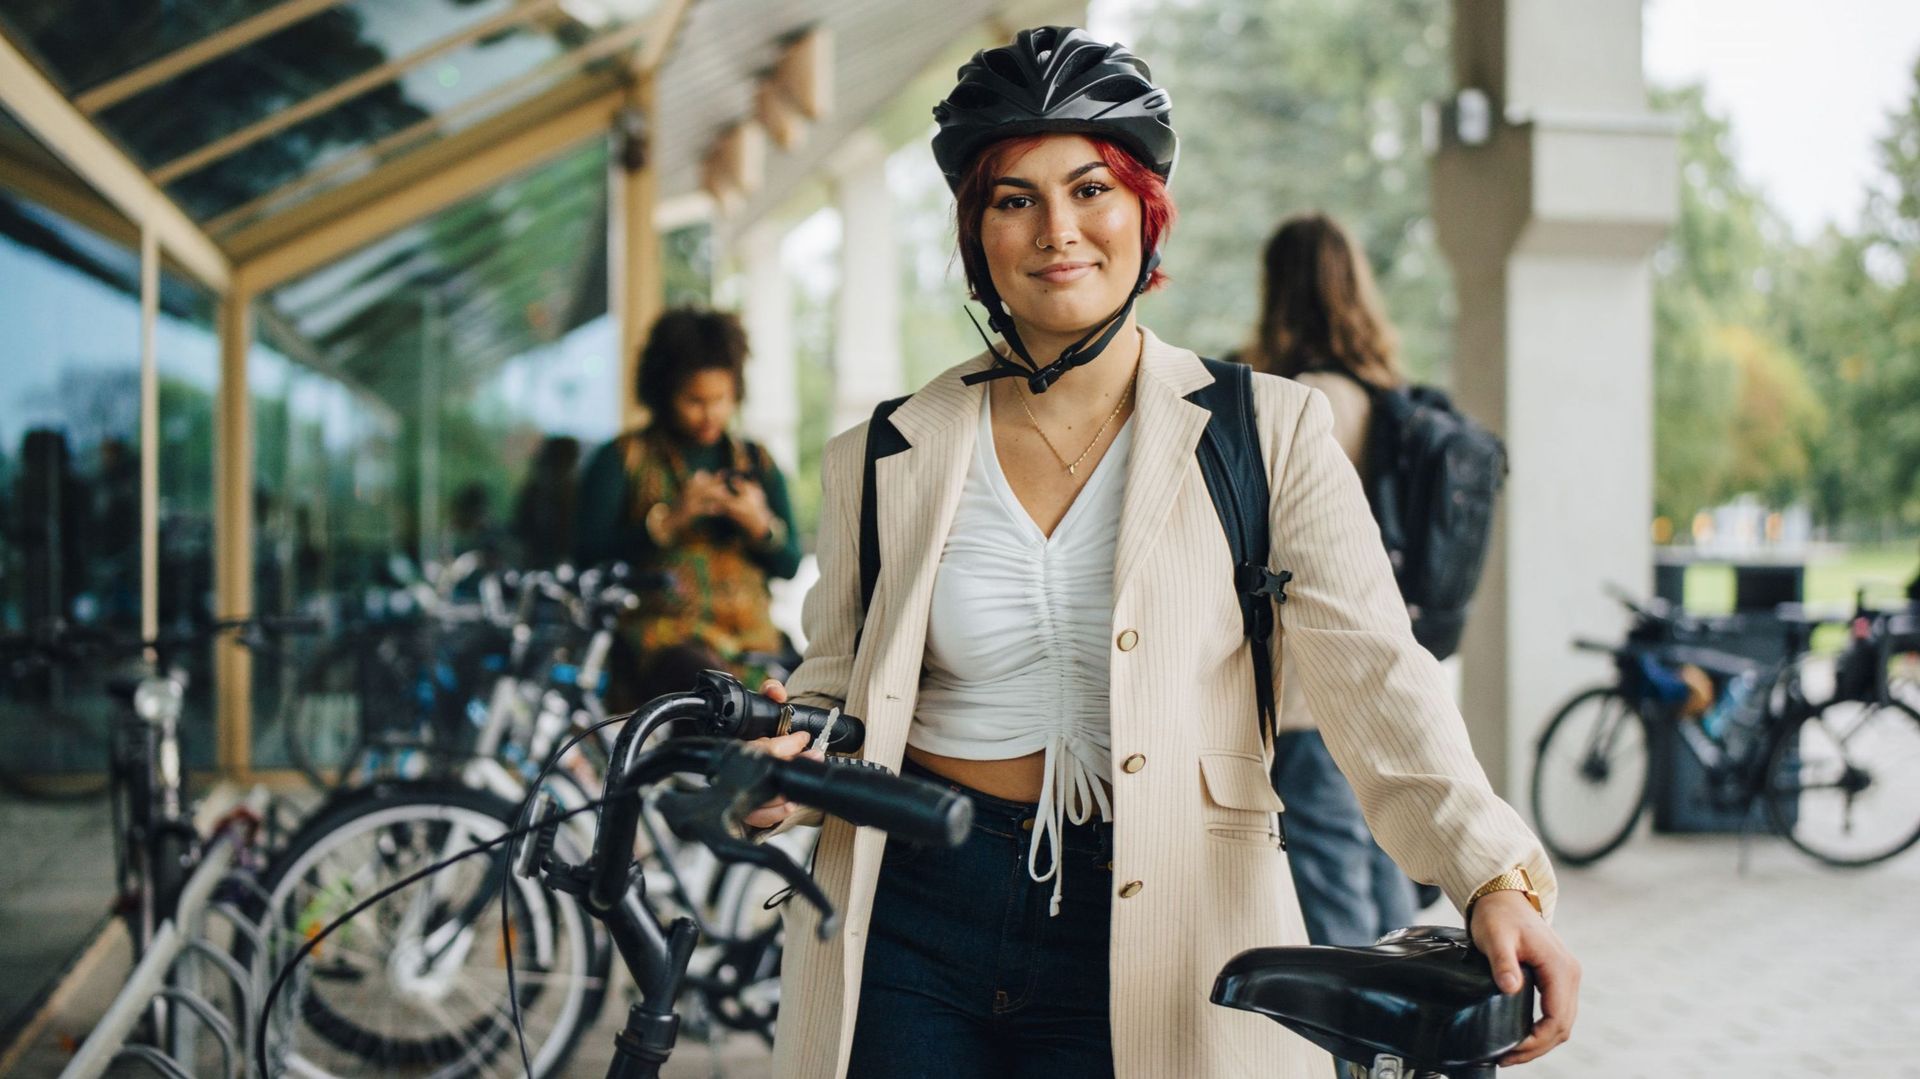 Portrait of female student with bicycle at university campus